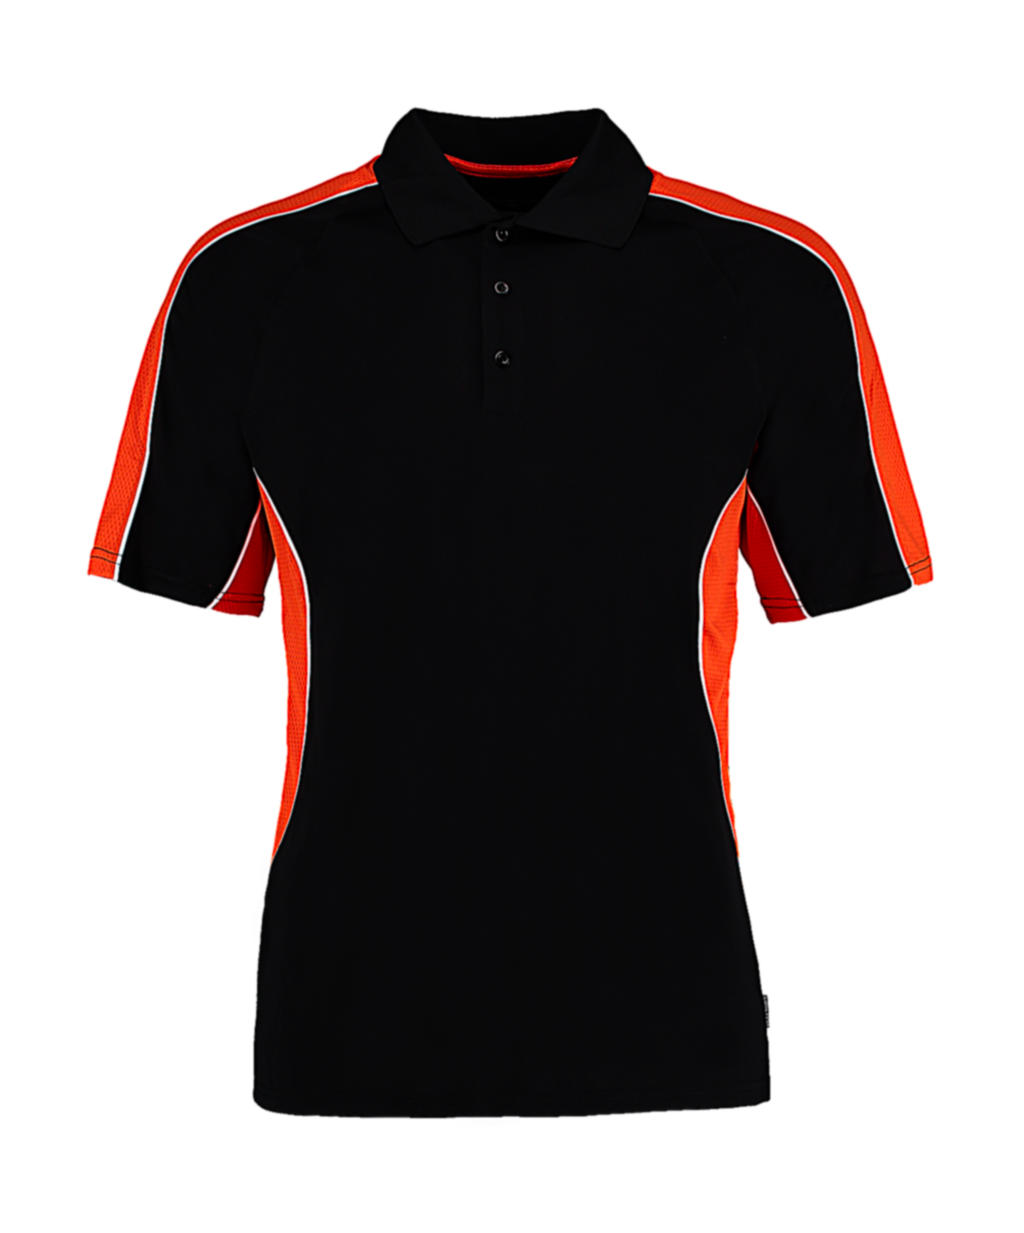  Classic Fit Cooltex? Contrast Polo Shirt in Farbe Black/Orange